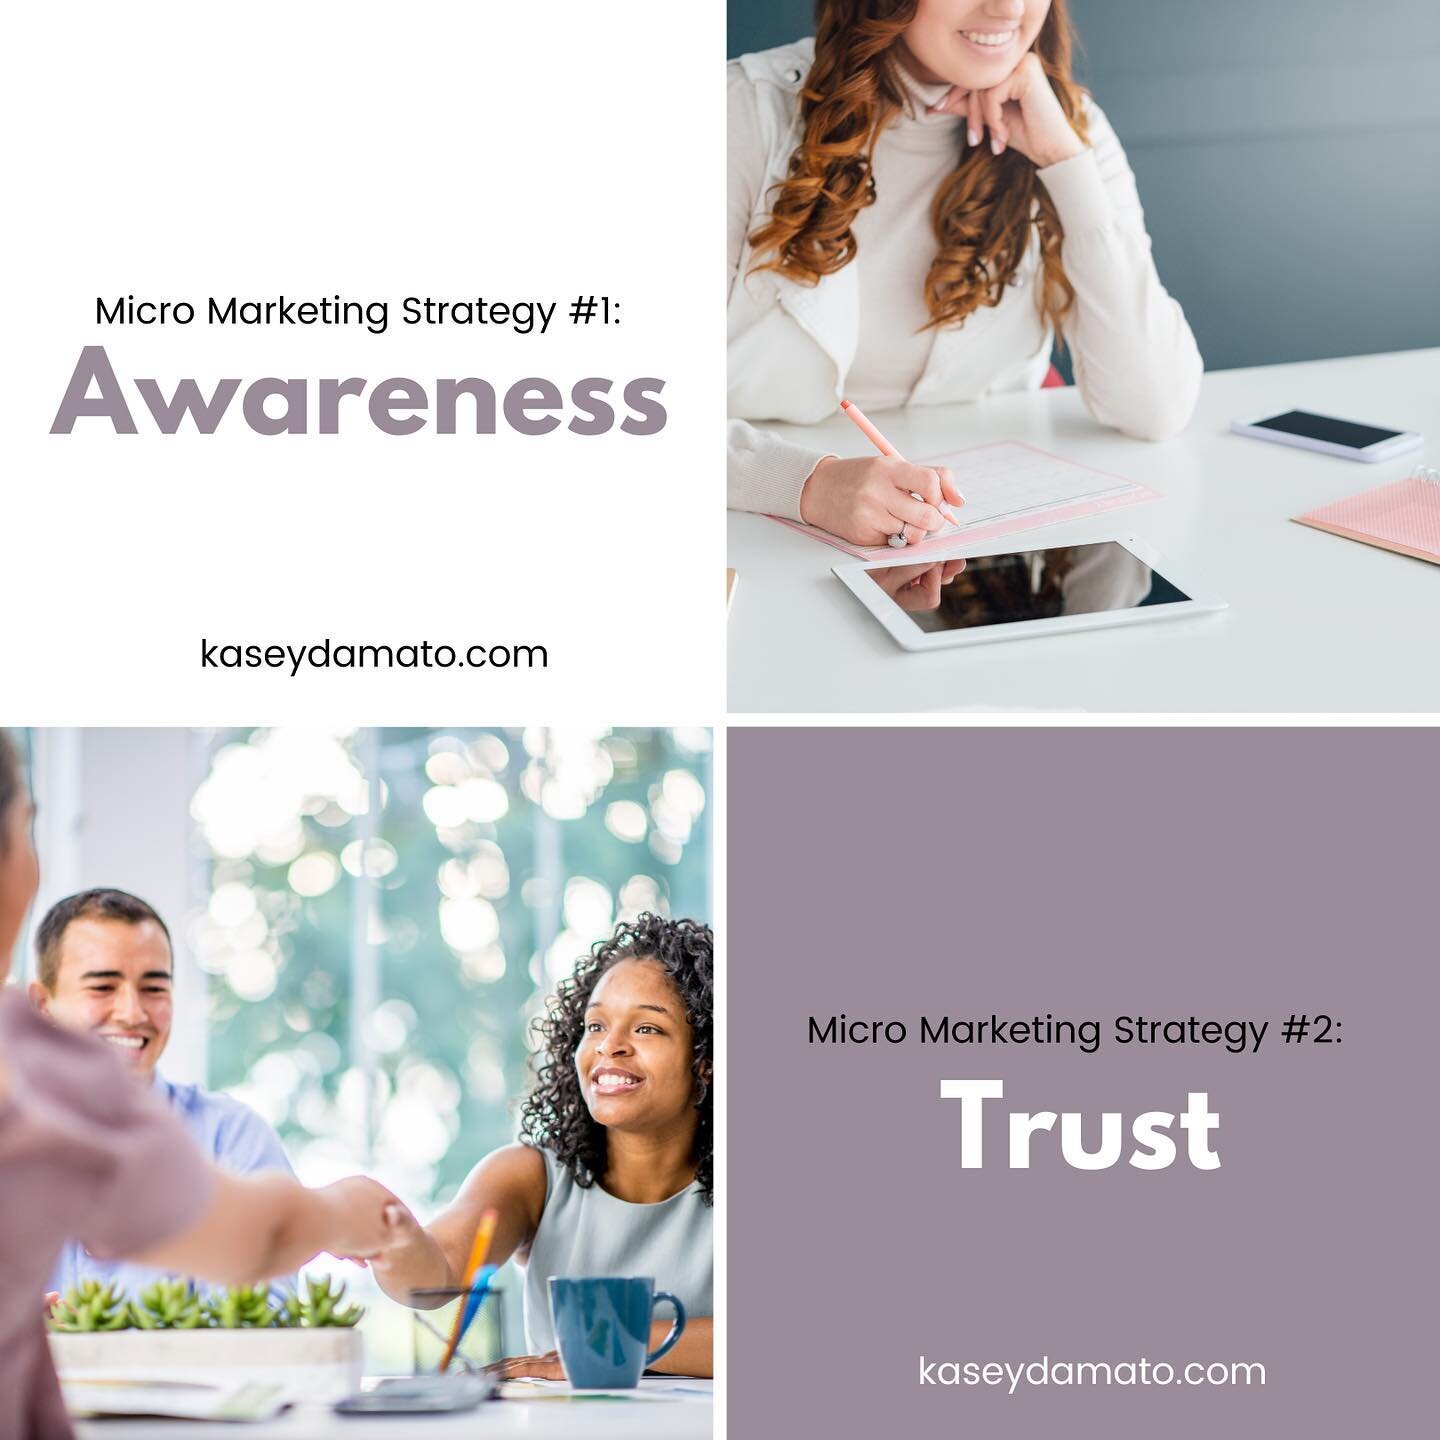 Attention business owners!
⠀
As a business advisor and exectuive coach, I know that marketing is the megaphone for your product or service. If you're just starting out, there are 2 micro strategies that are critical for early stage marketing success: